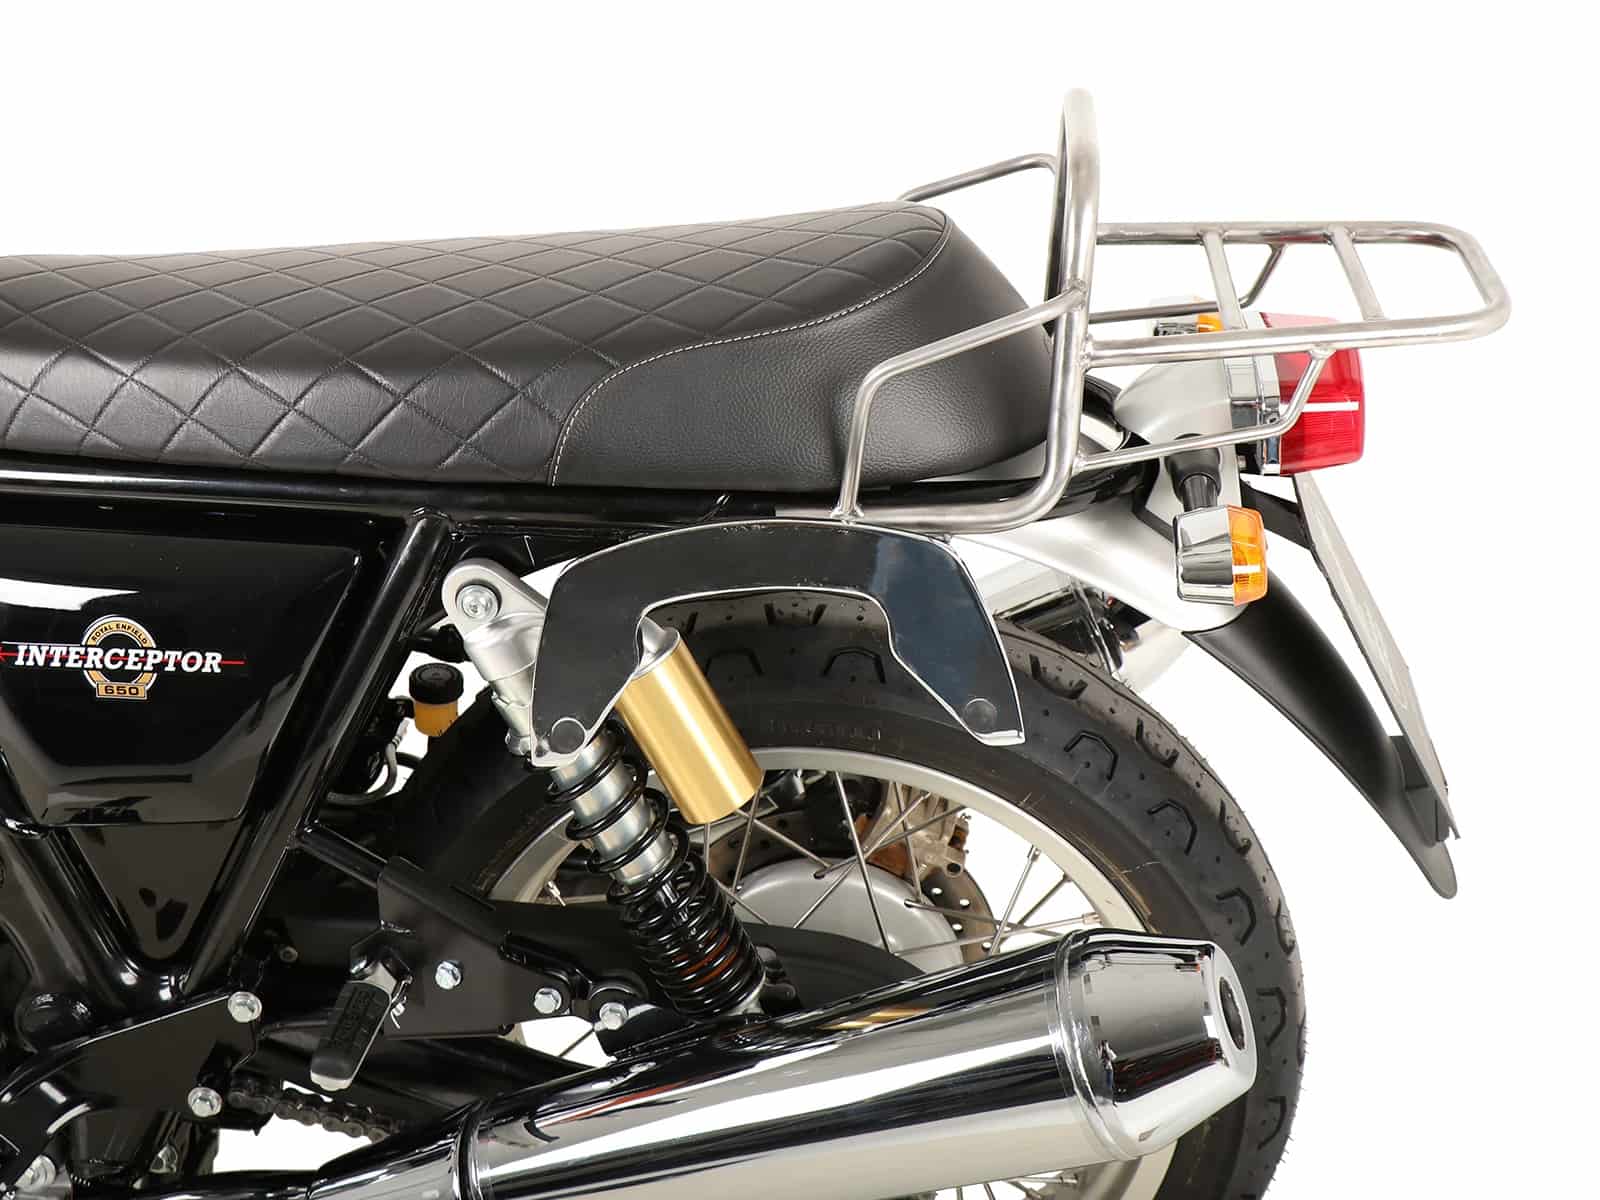 C-Bow sidecarrier for Royal Enfield Interceptor (2018-) / Continental 650 / GT 650 (2019-)